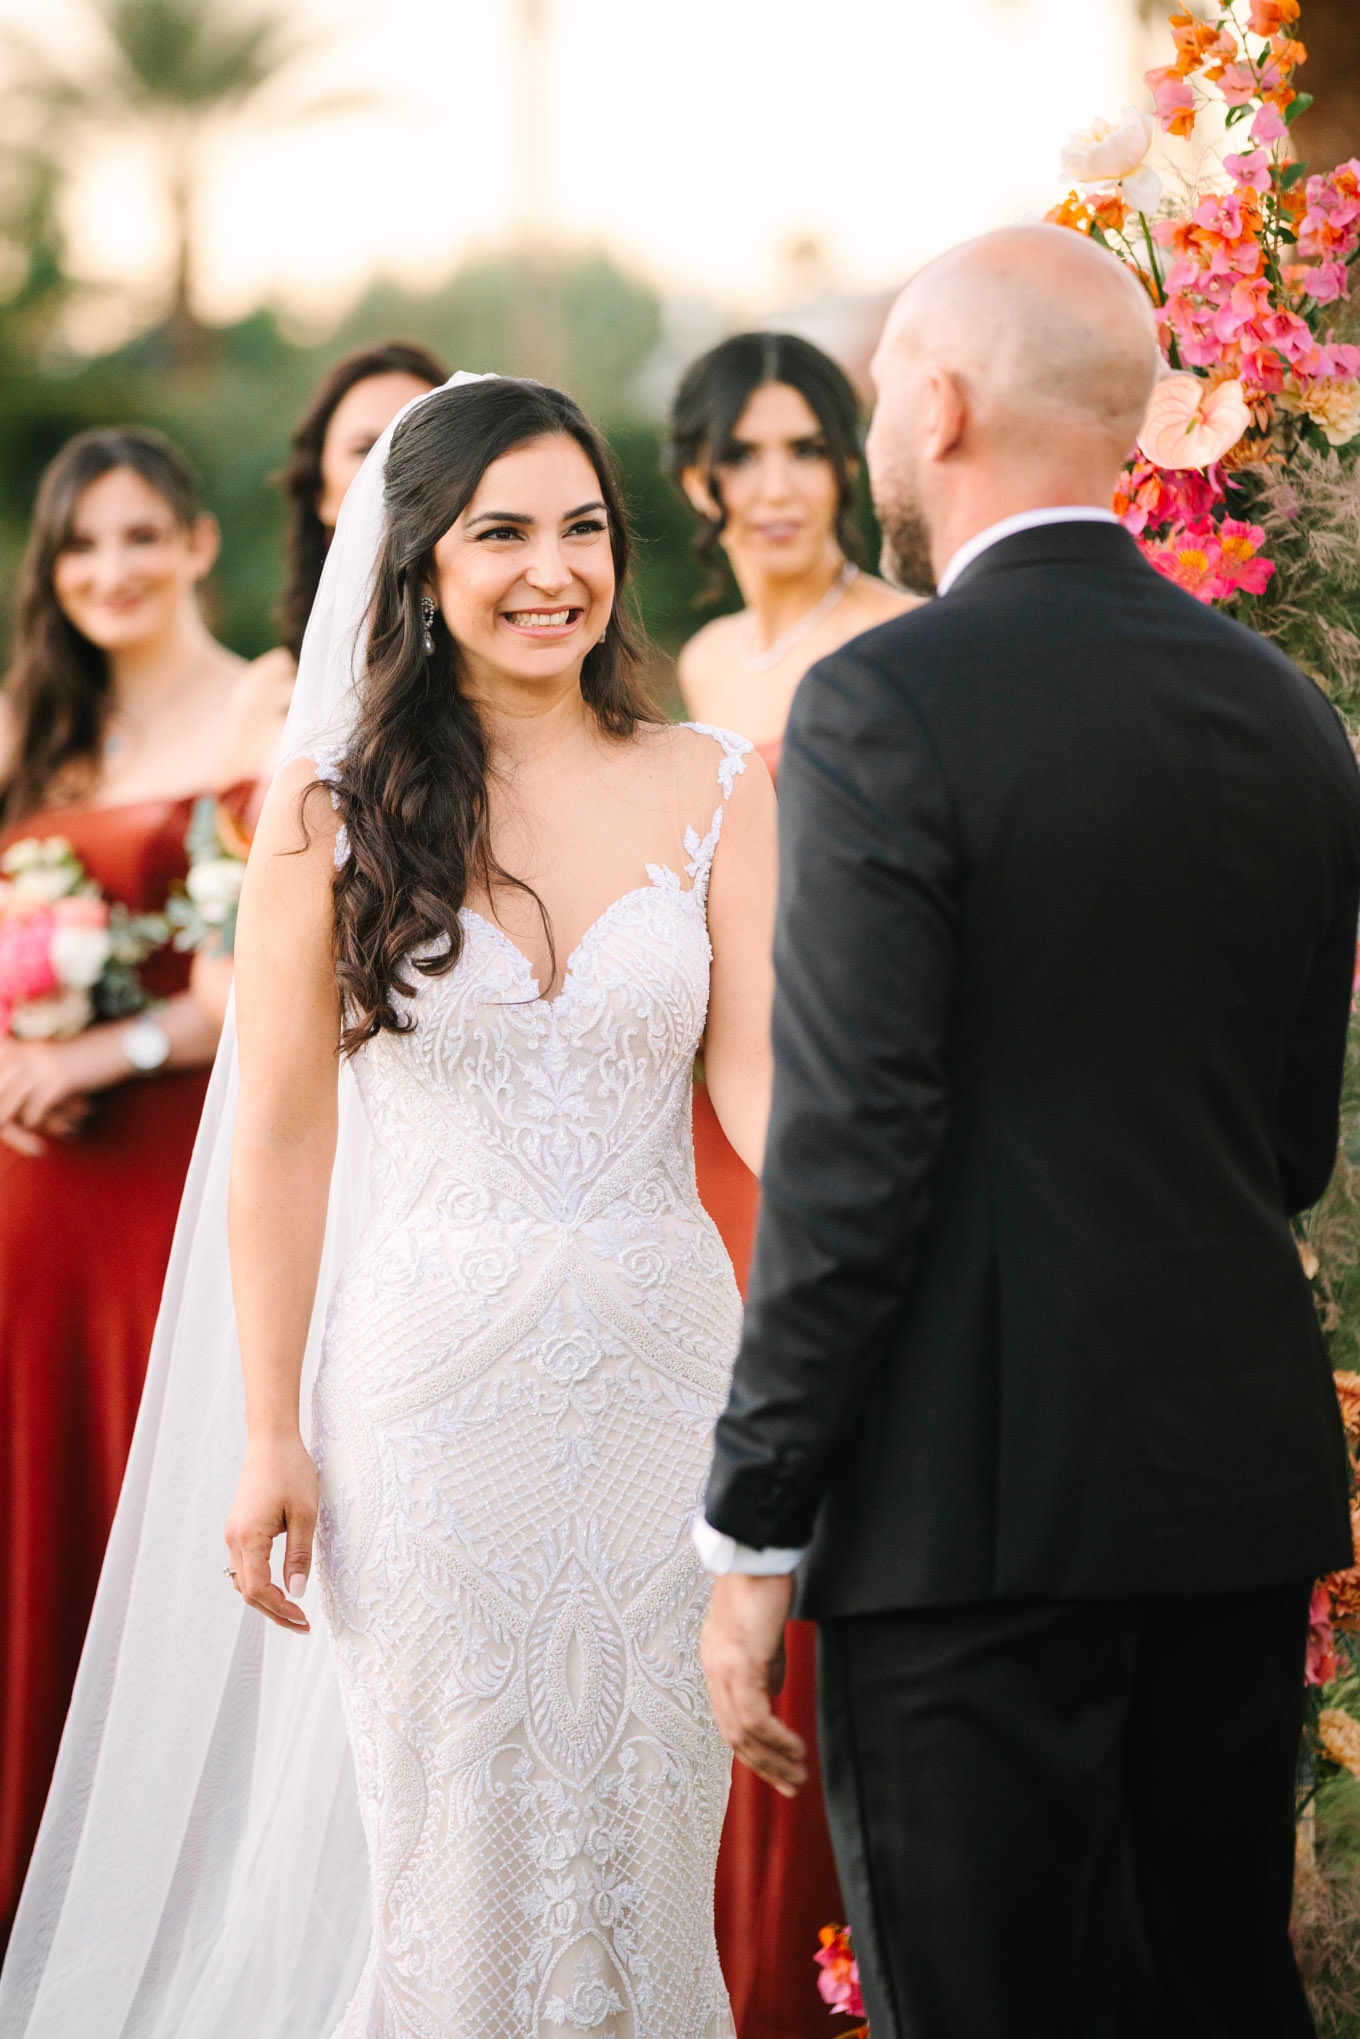 Bride during ceremony | Pink Bougainvillea Estate wedding | Colorful LA wedding photography | #bougainvilleaestate #palmspringswedding #palmspringsweddingvenue #palmspringsphotographer Source: Mary Costa Photography | Los Angeles